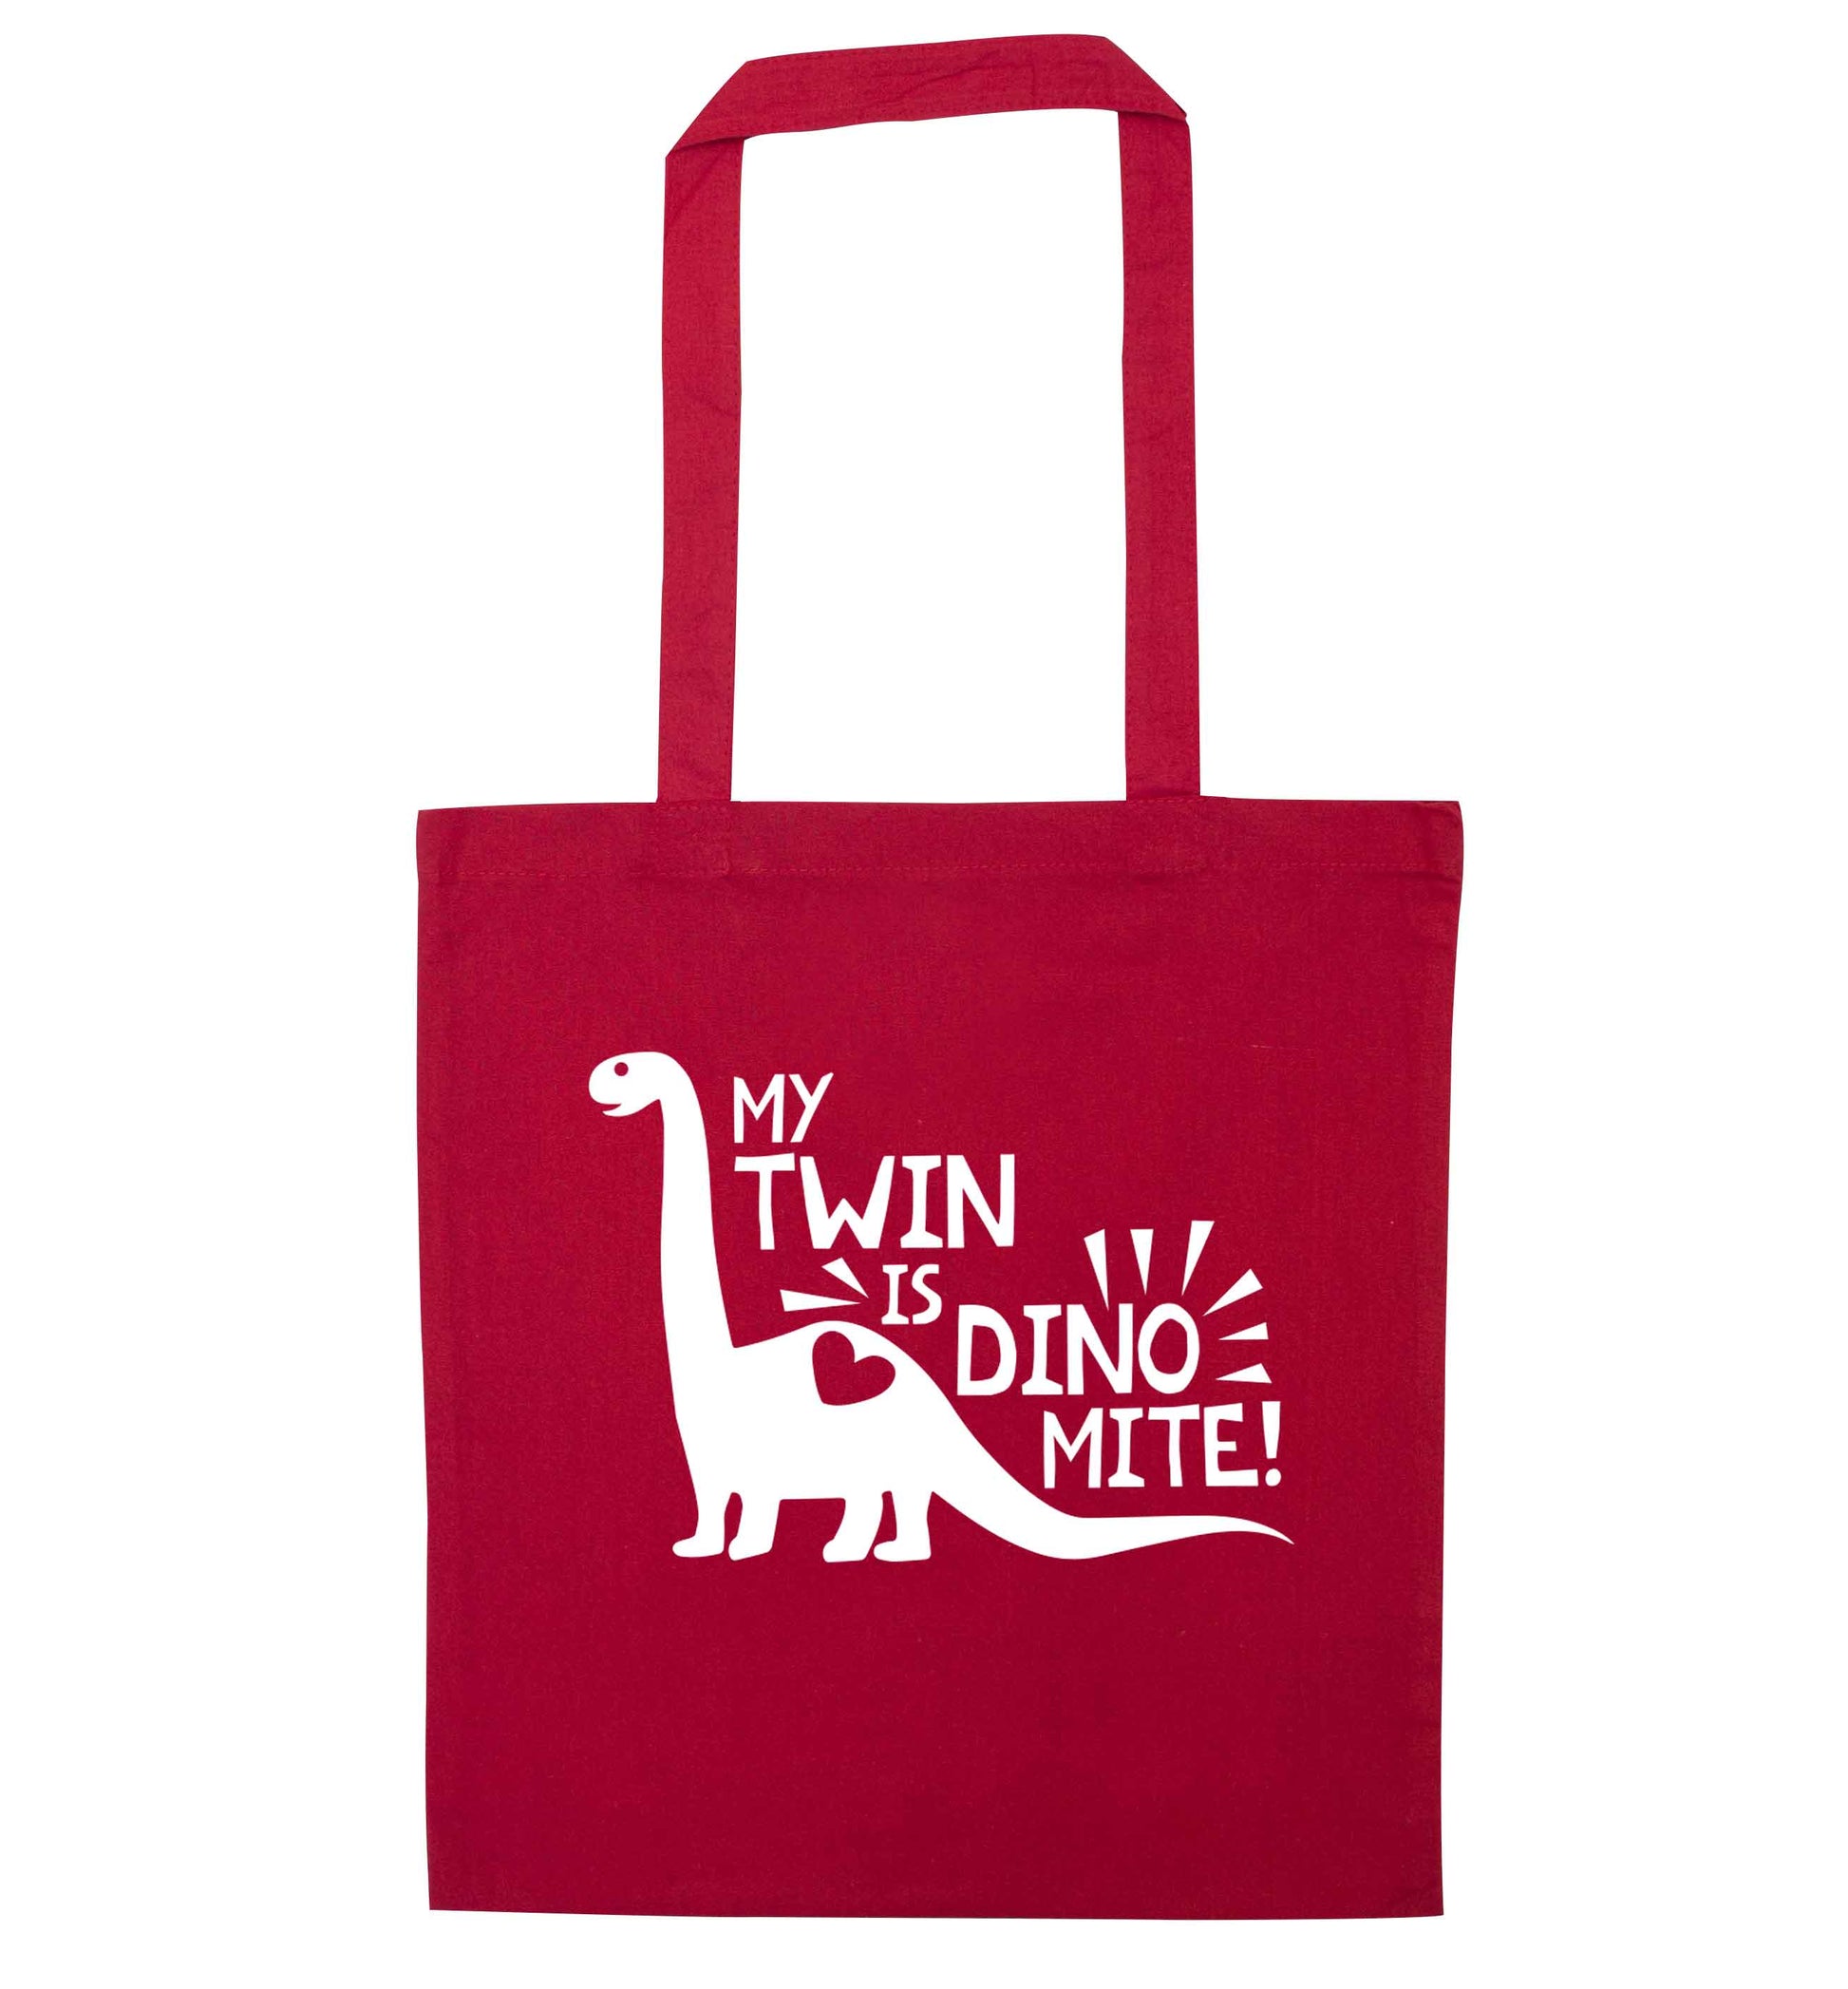 My twin is dinomite! red tote bag